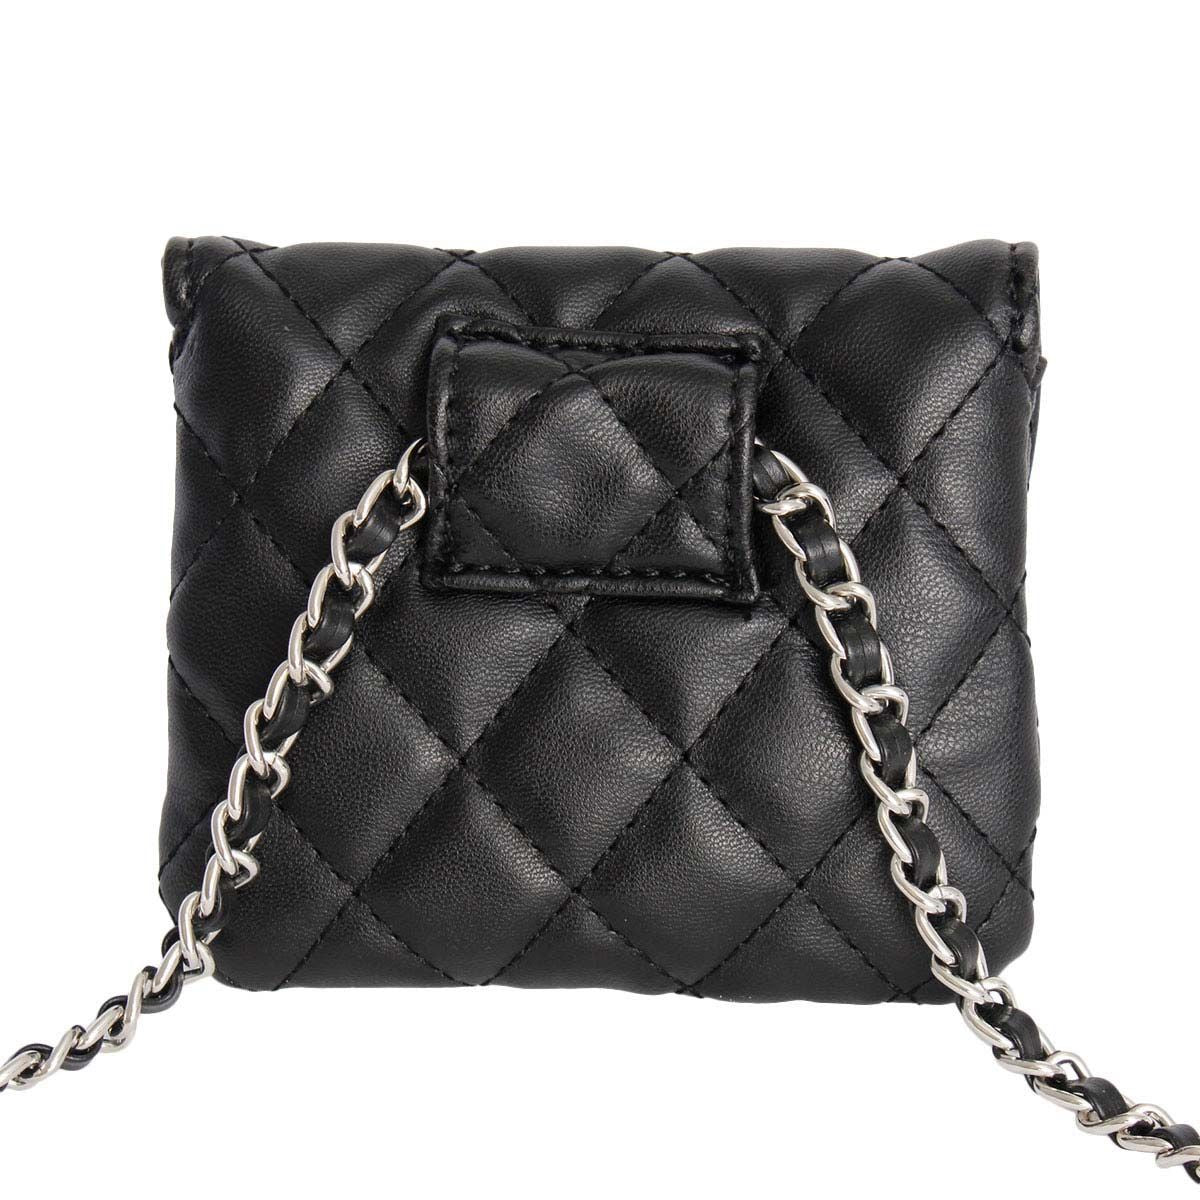 Quilted Black and Silver Mini Bag